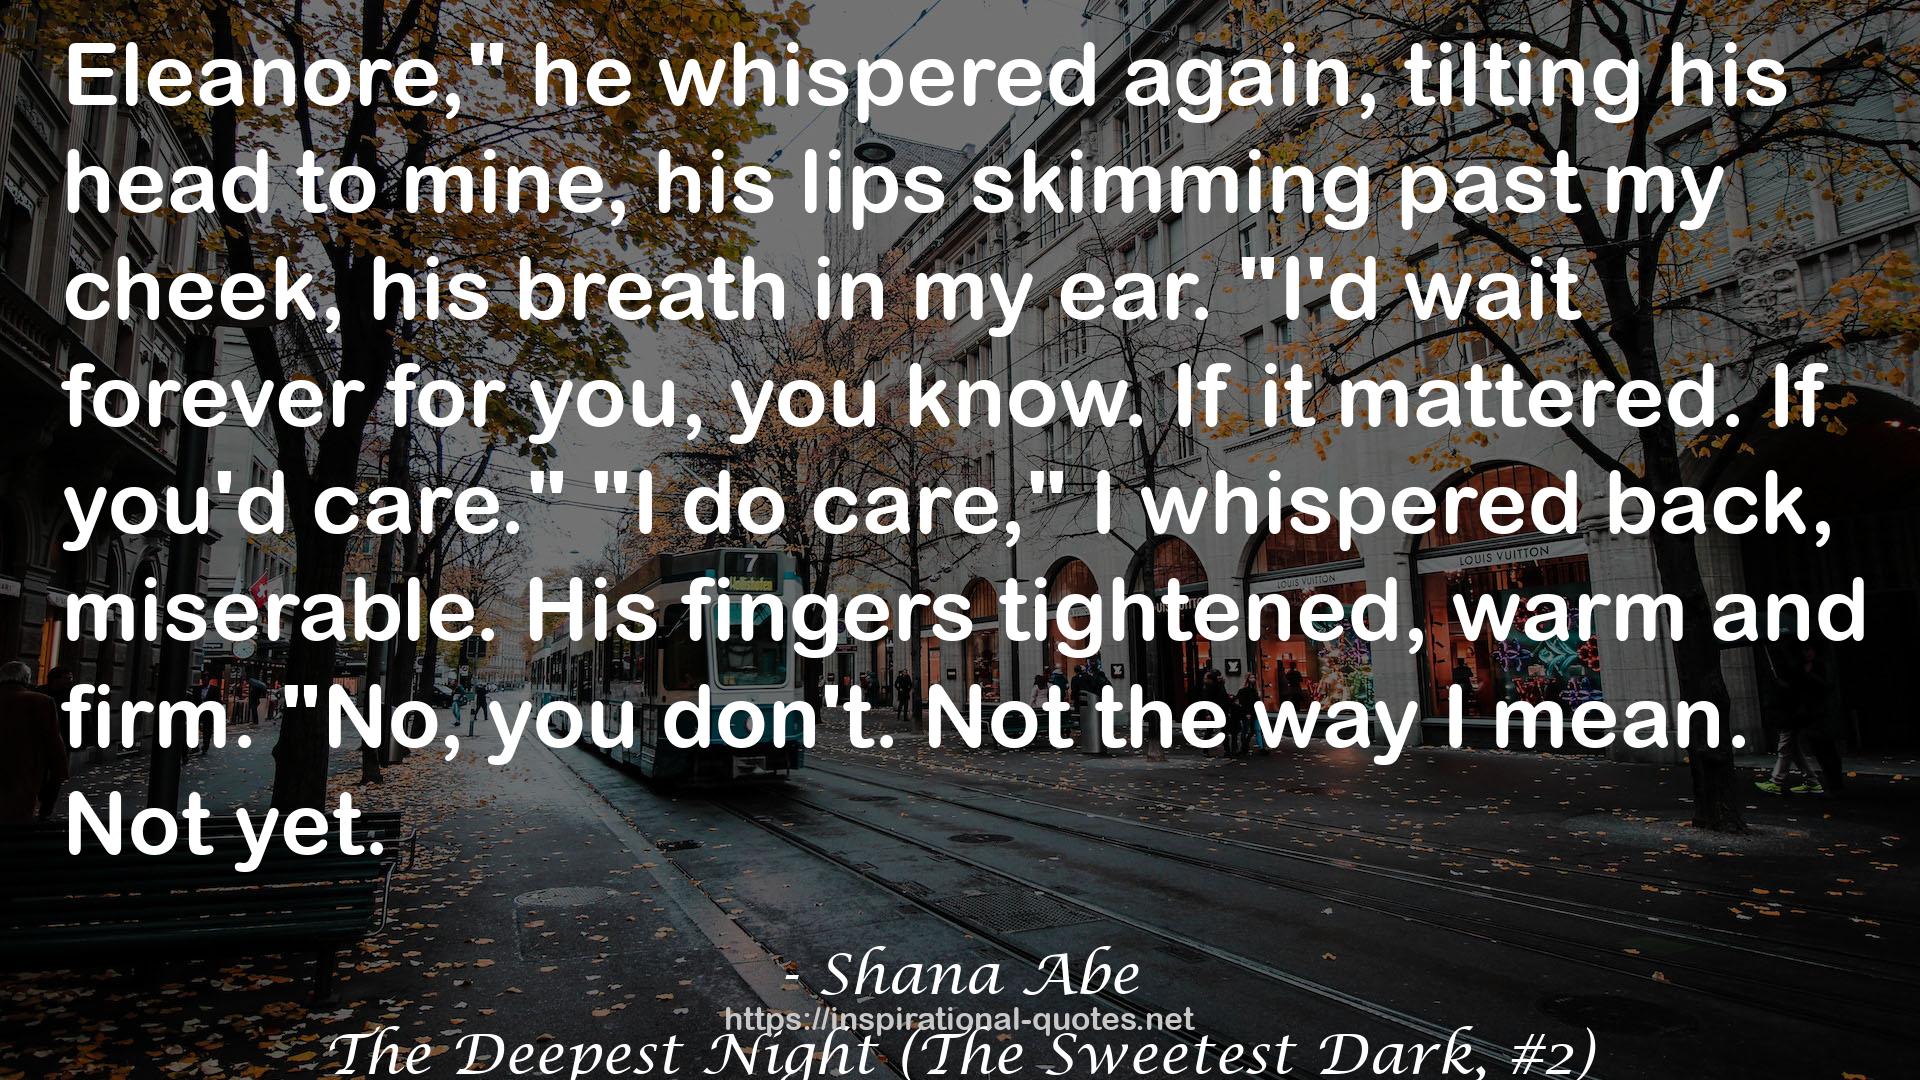 The Deepest Night (The Sweetest Dark, #2) QUOTES